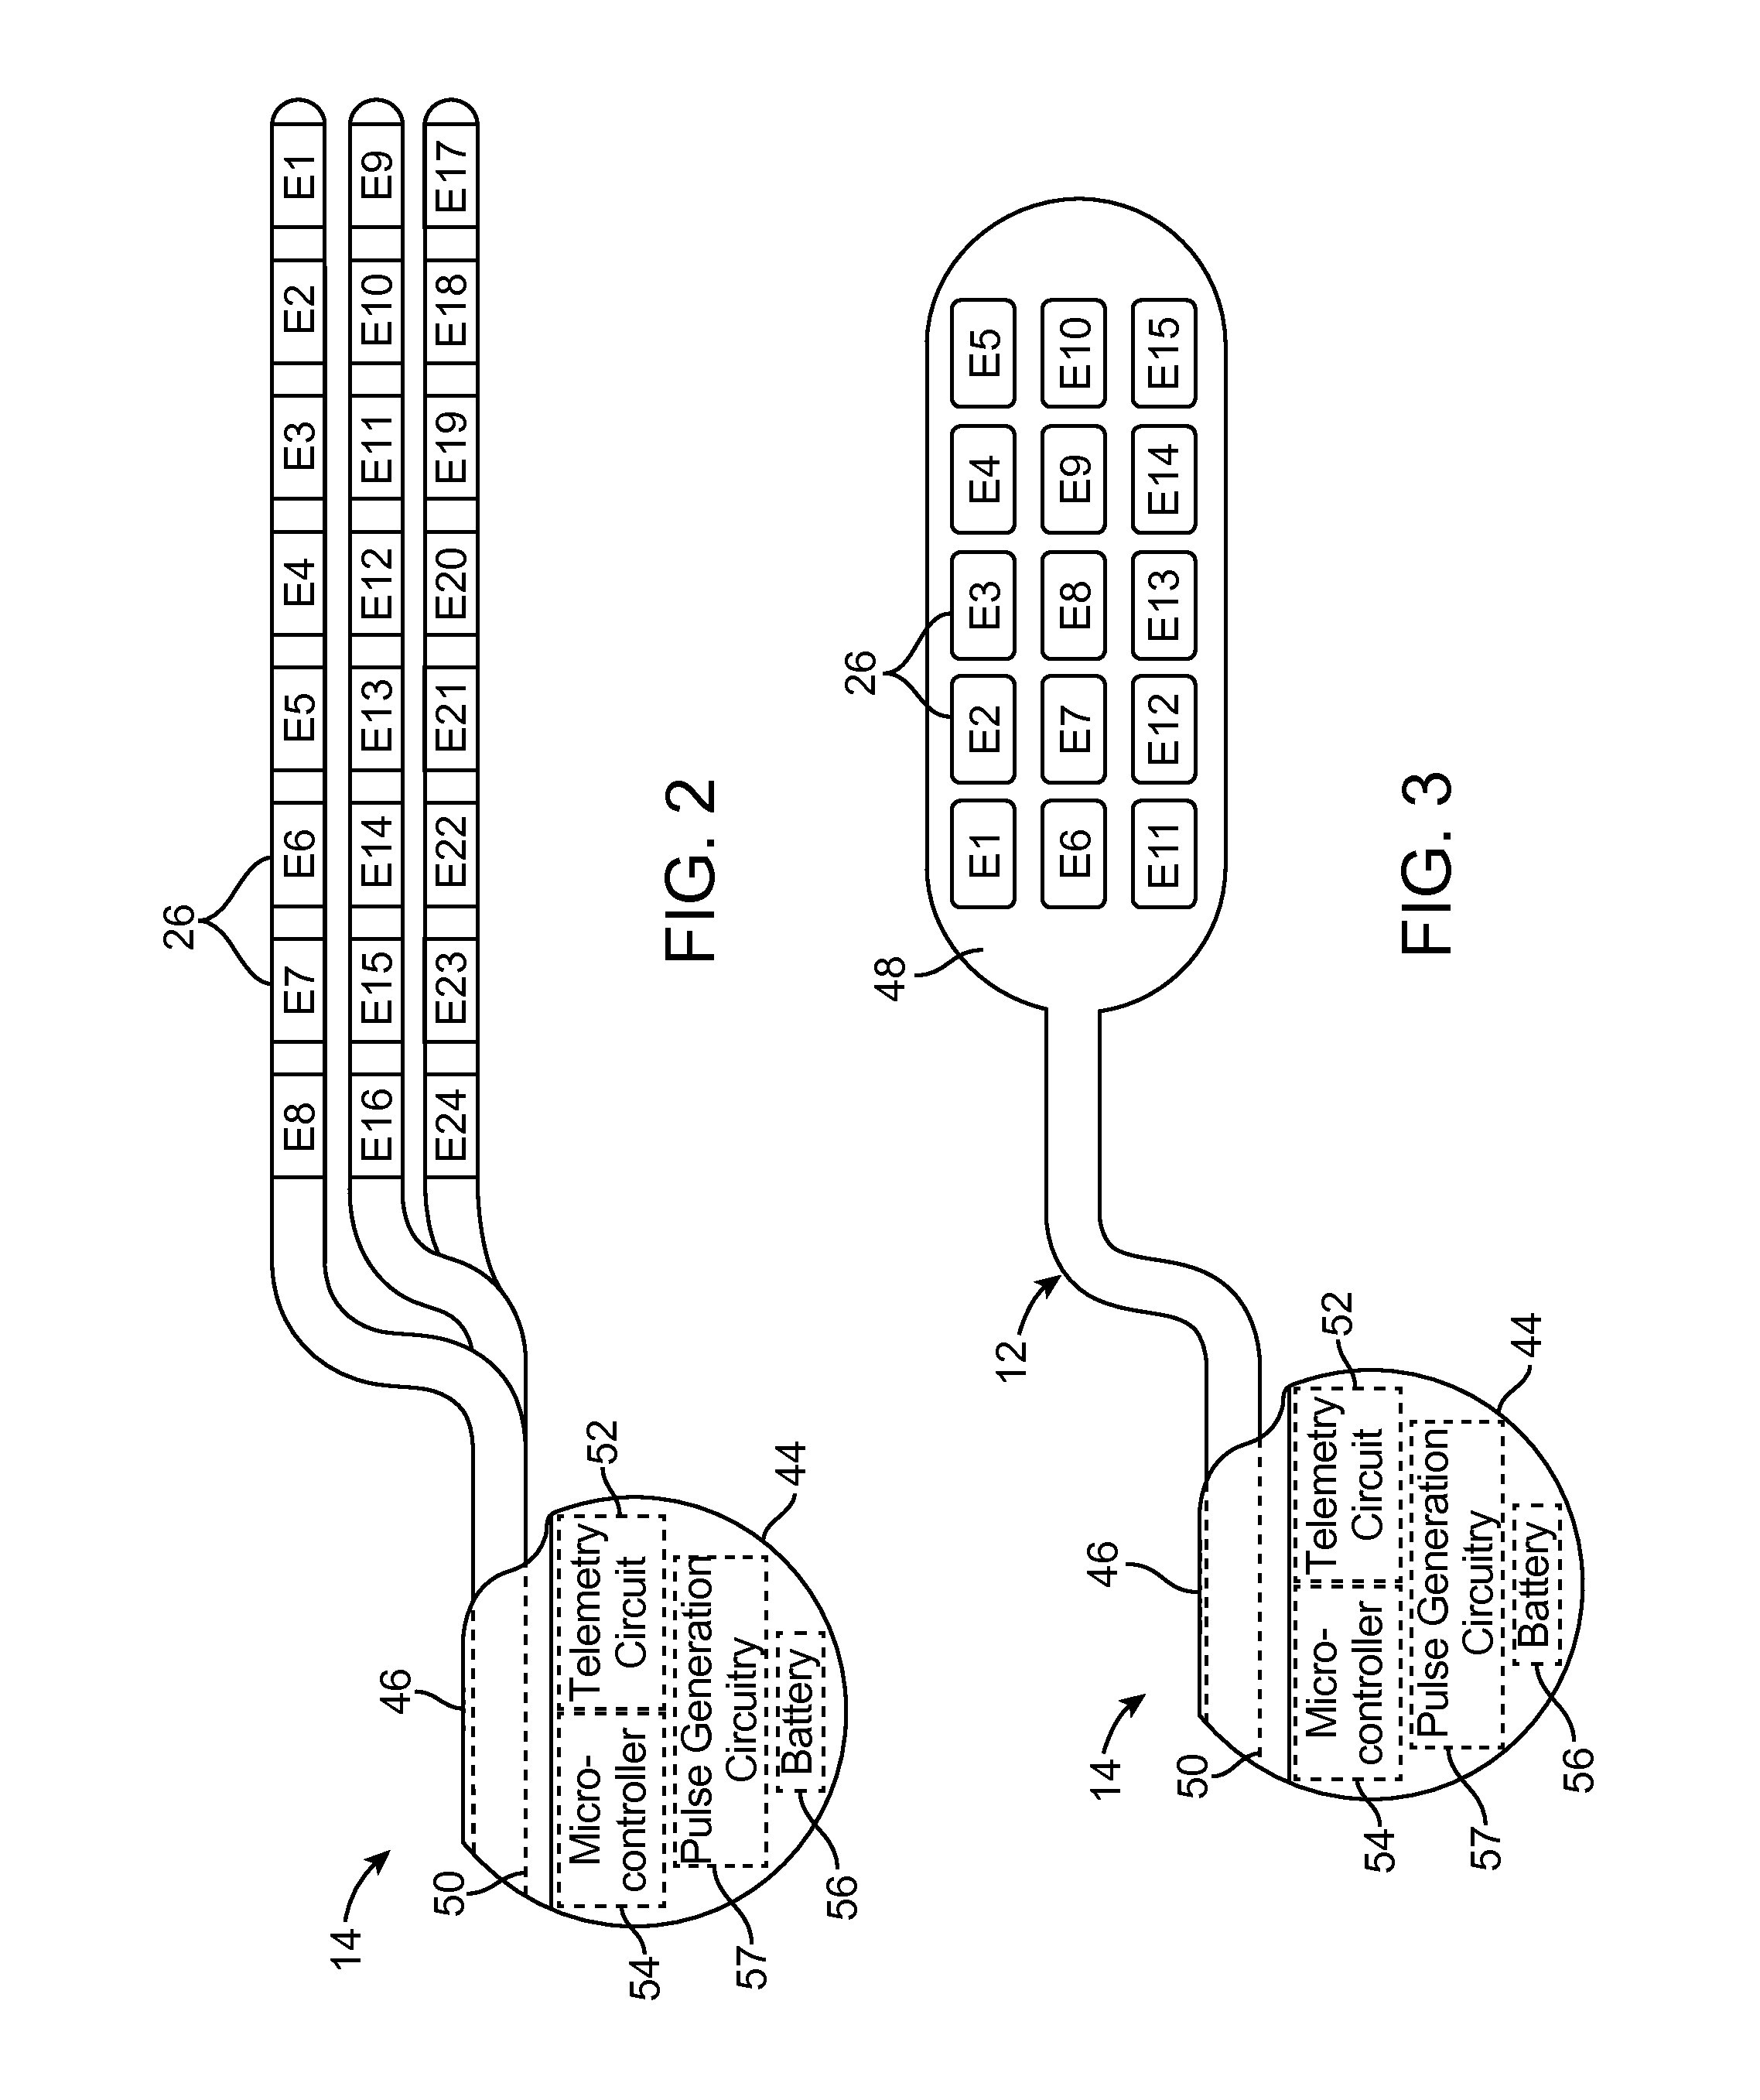 Method for treating hypertension via electrical stimulation of neural structures